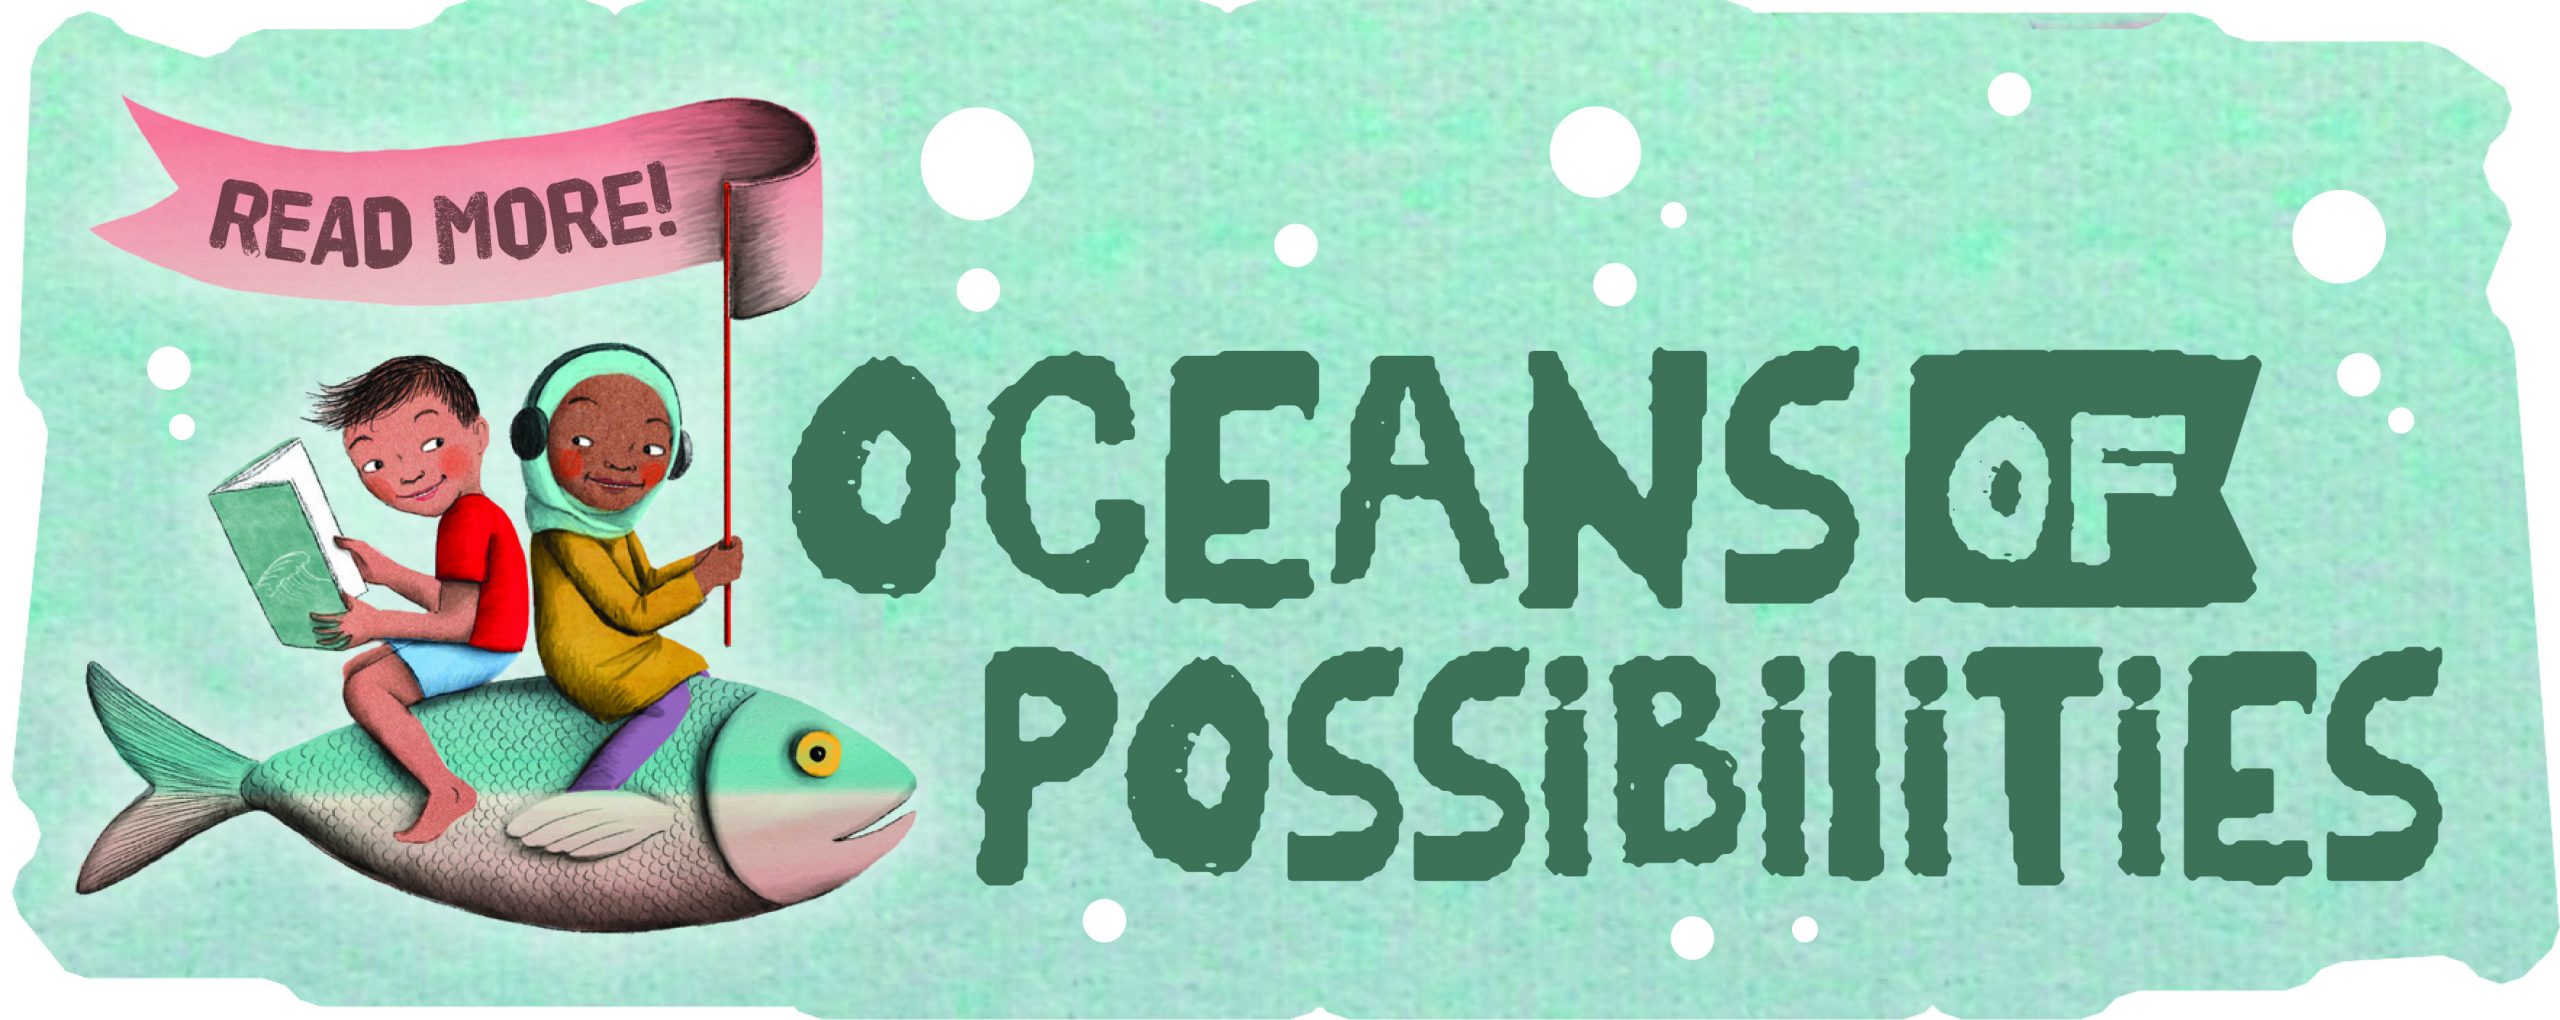 oceans of possibilities summer reading graphic